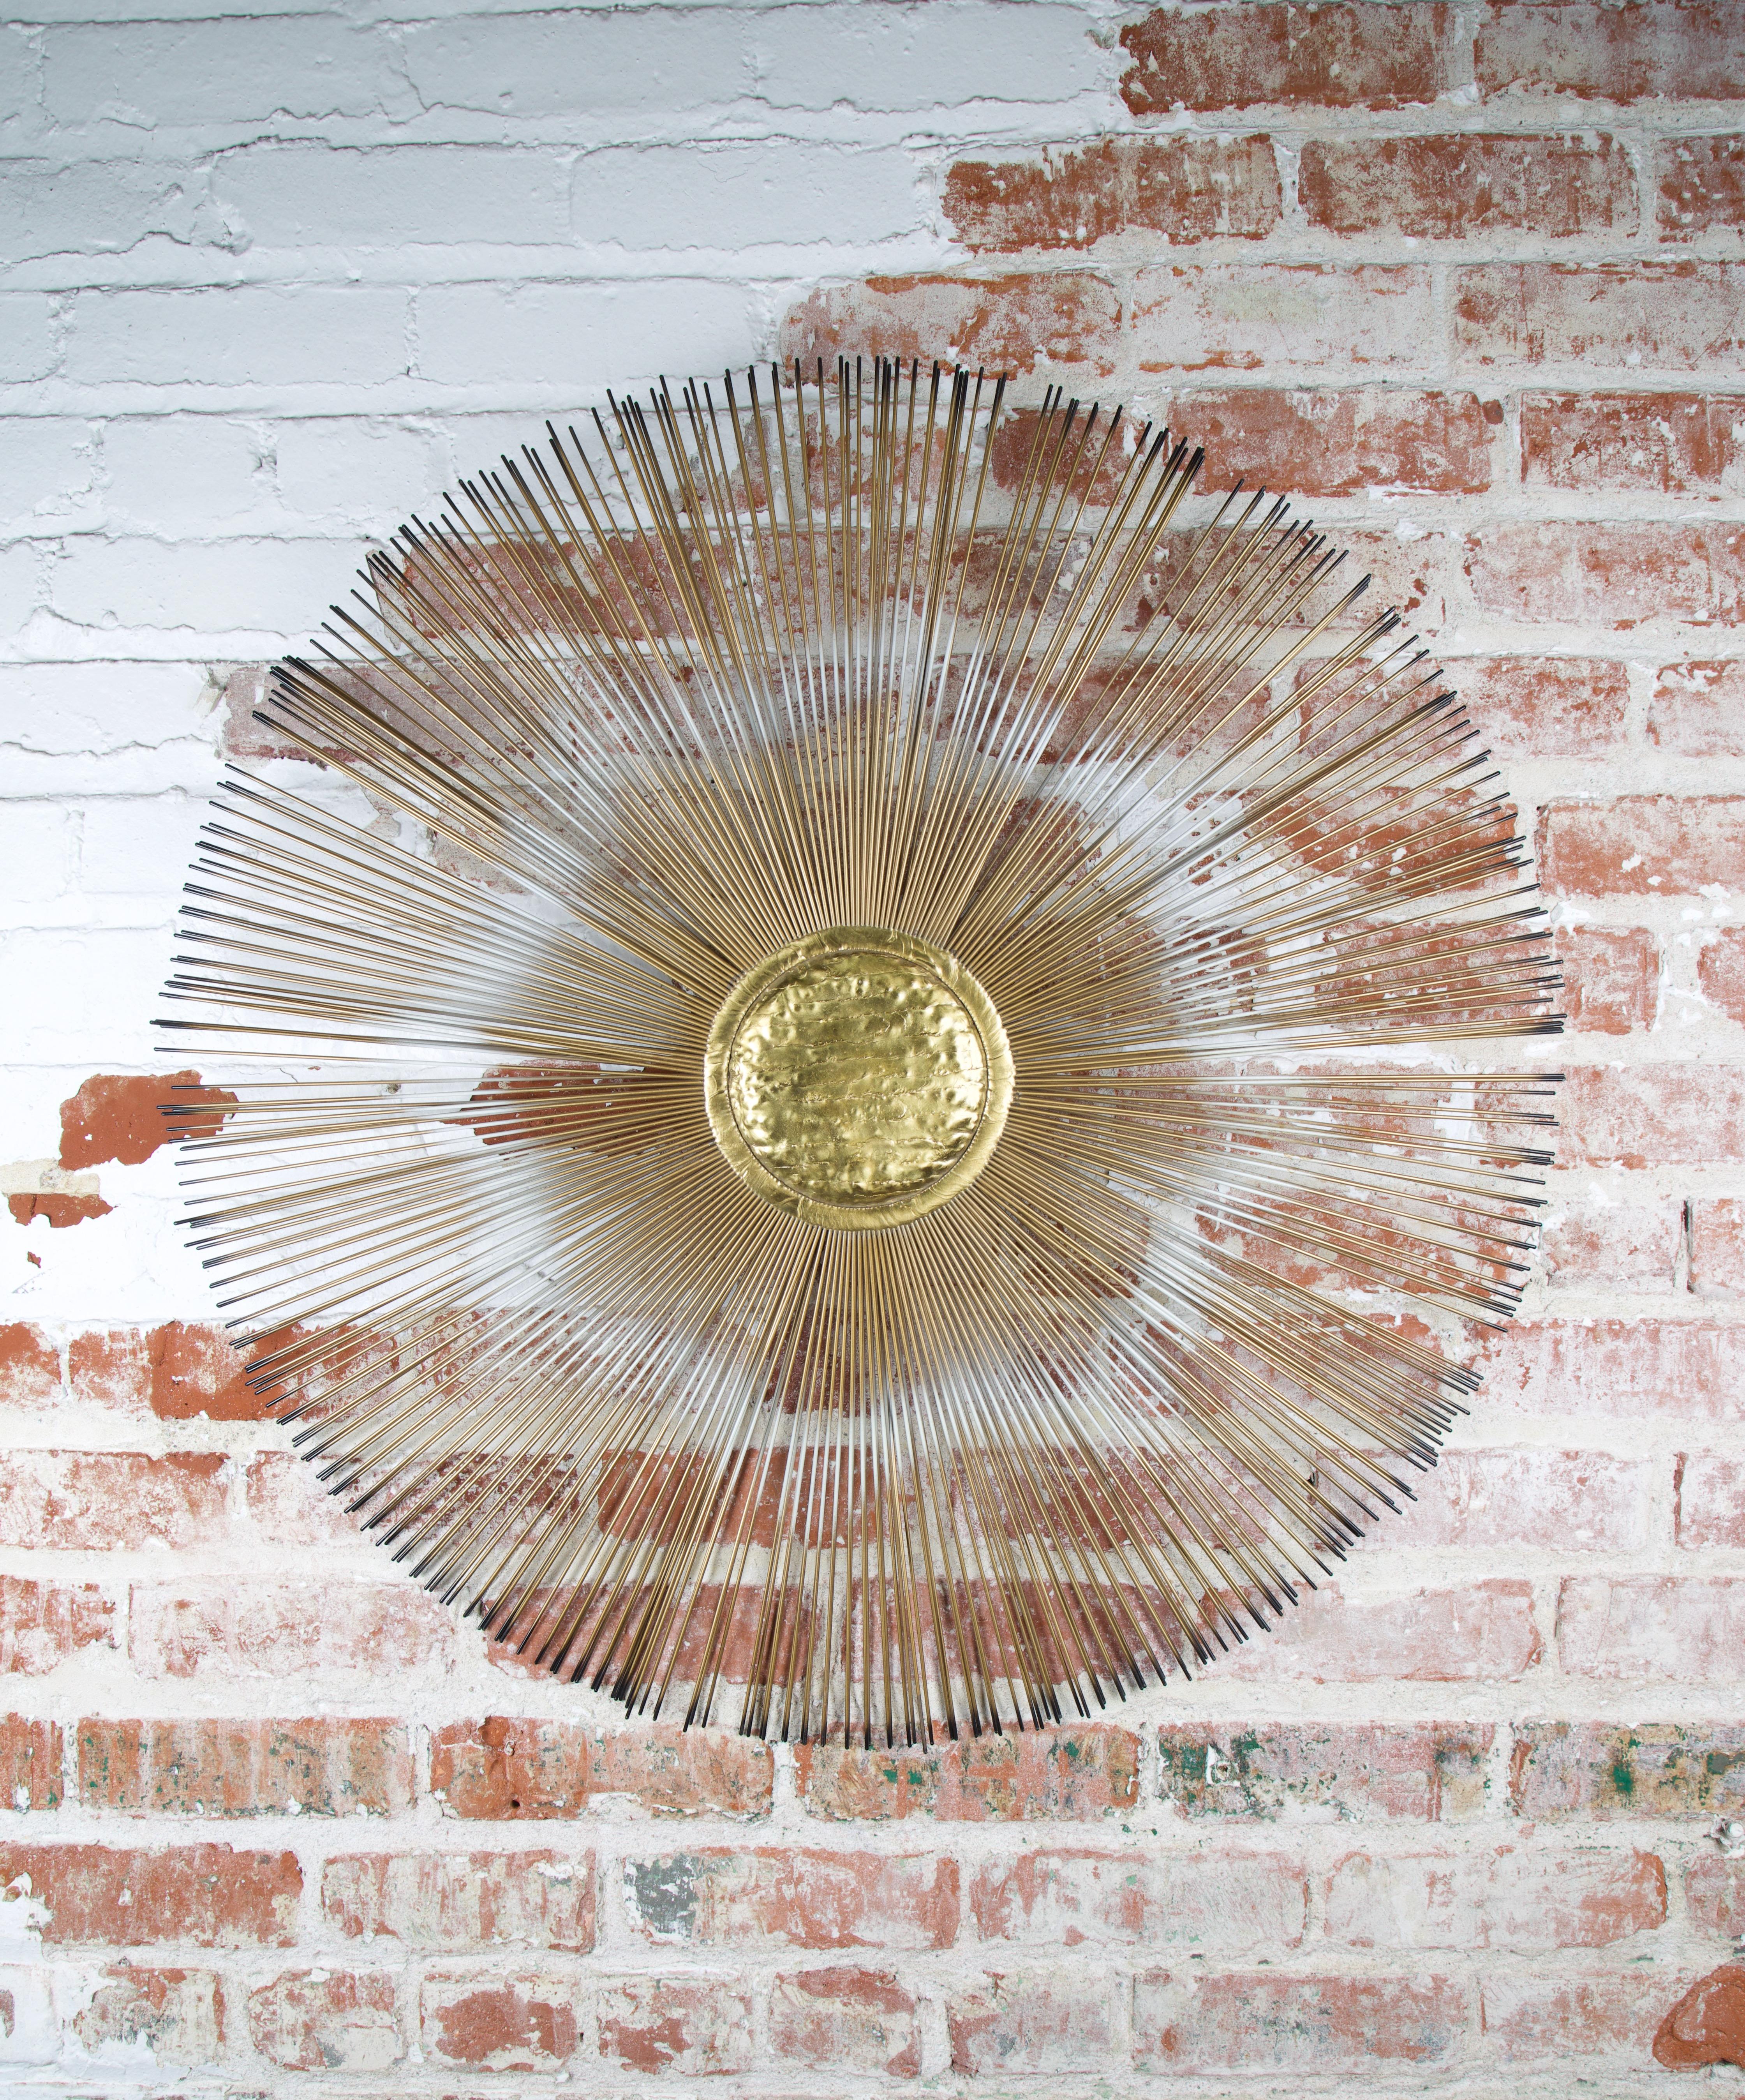 Sunburst wall sculpture with a hammered brass center and two layers of painted rods creating a sunburst effect. The artist hand signed the sculpture on the verso.